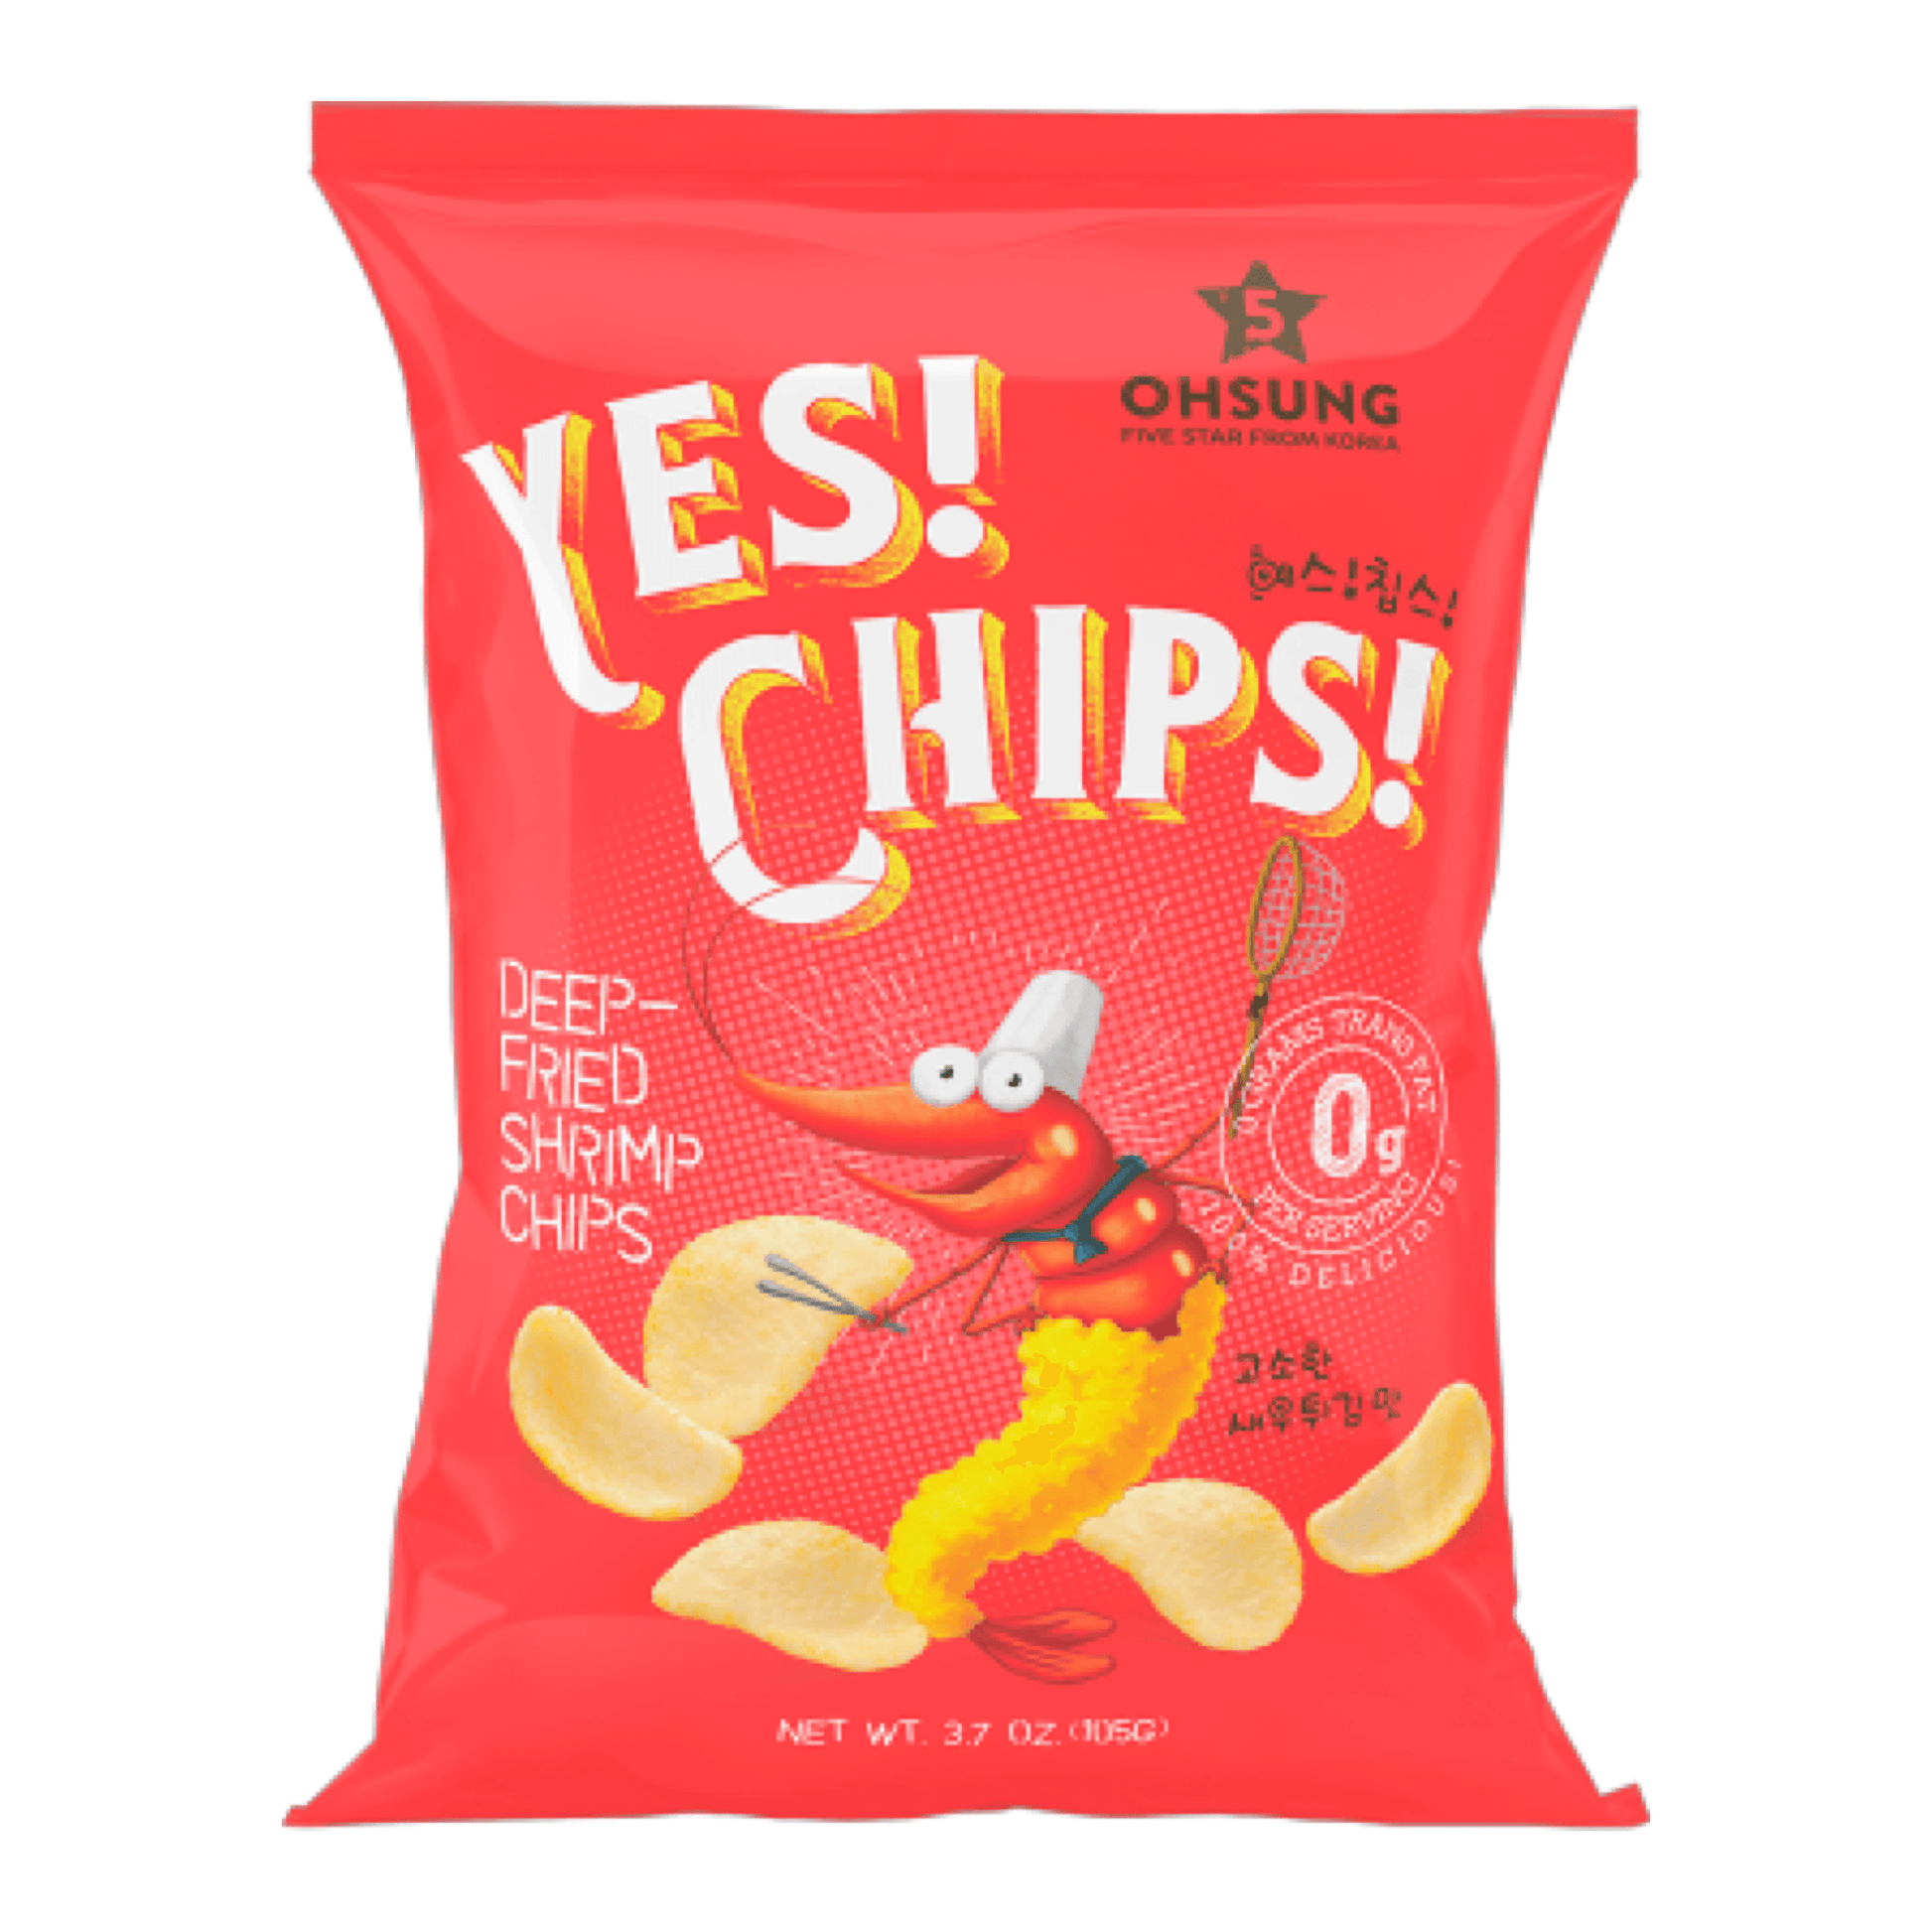 Ohsung Yes! Chips! Deep-fried Shrimp Chips 105g - The Snacks Box - Asian Snacks Store - The Snacks Box - Korean Snack - Japanese Snack